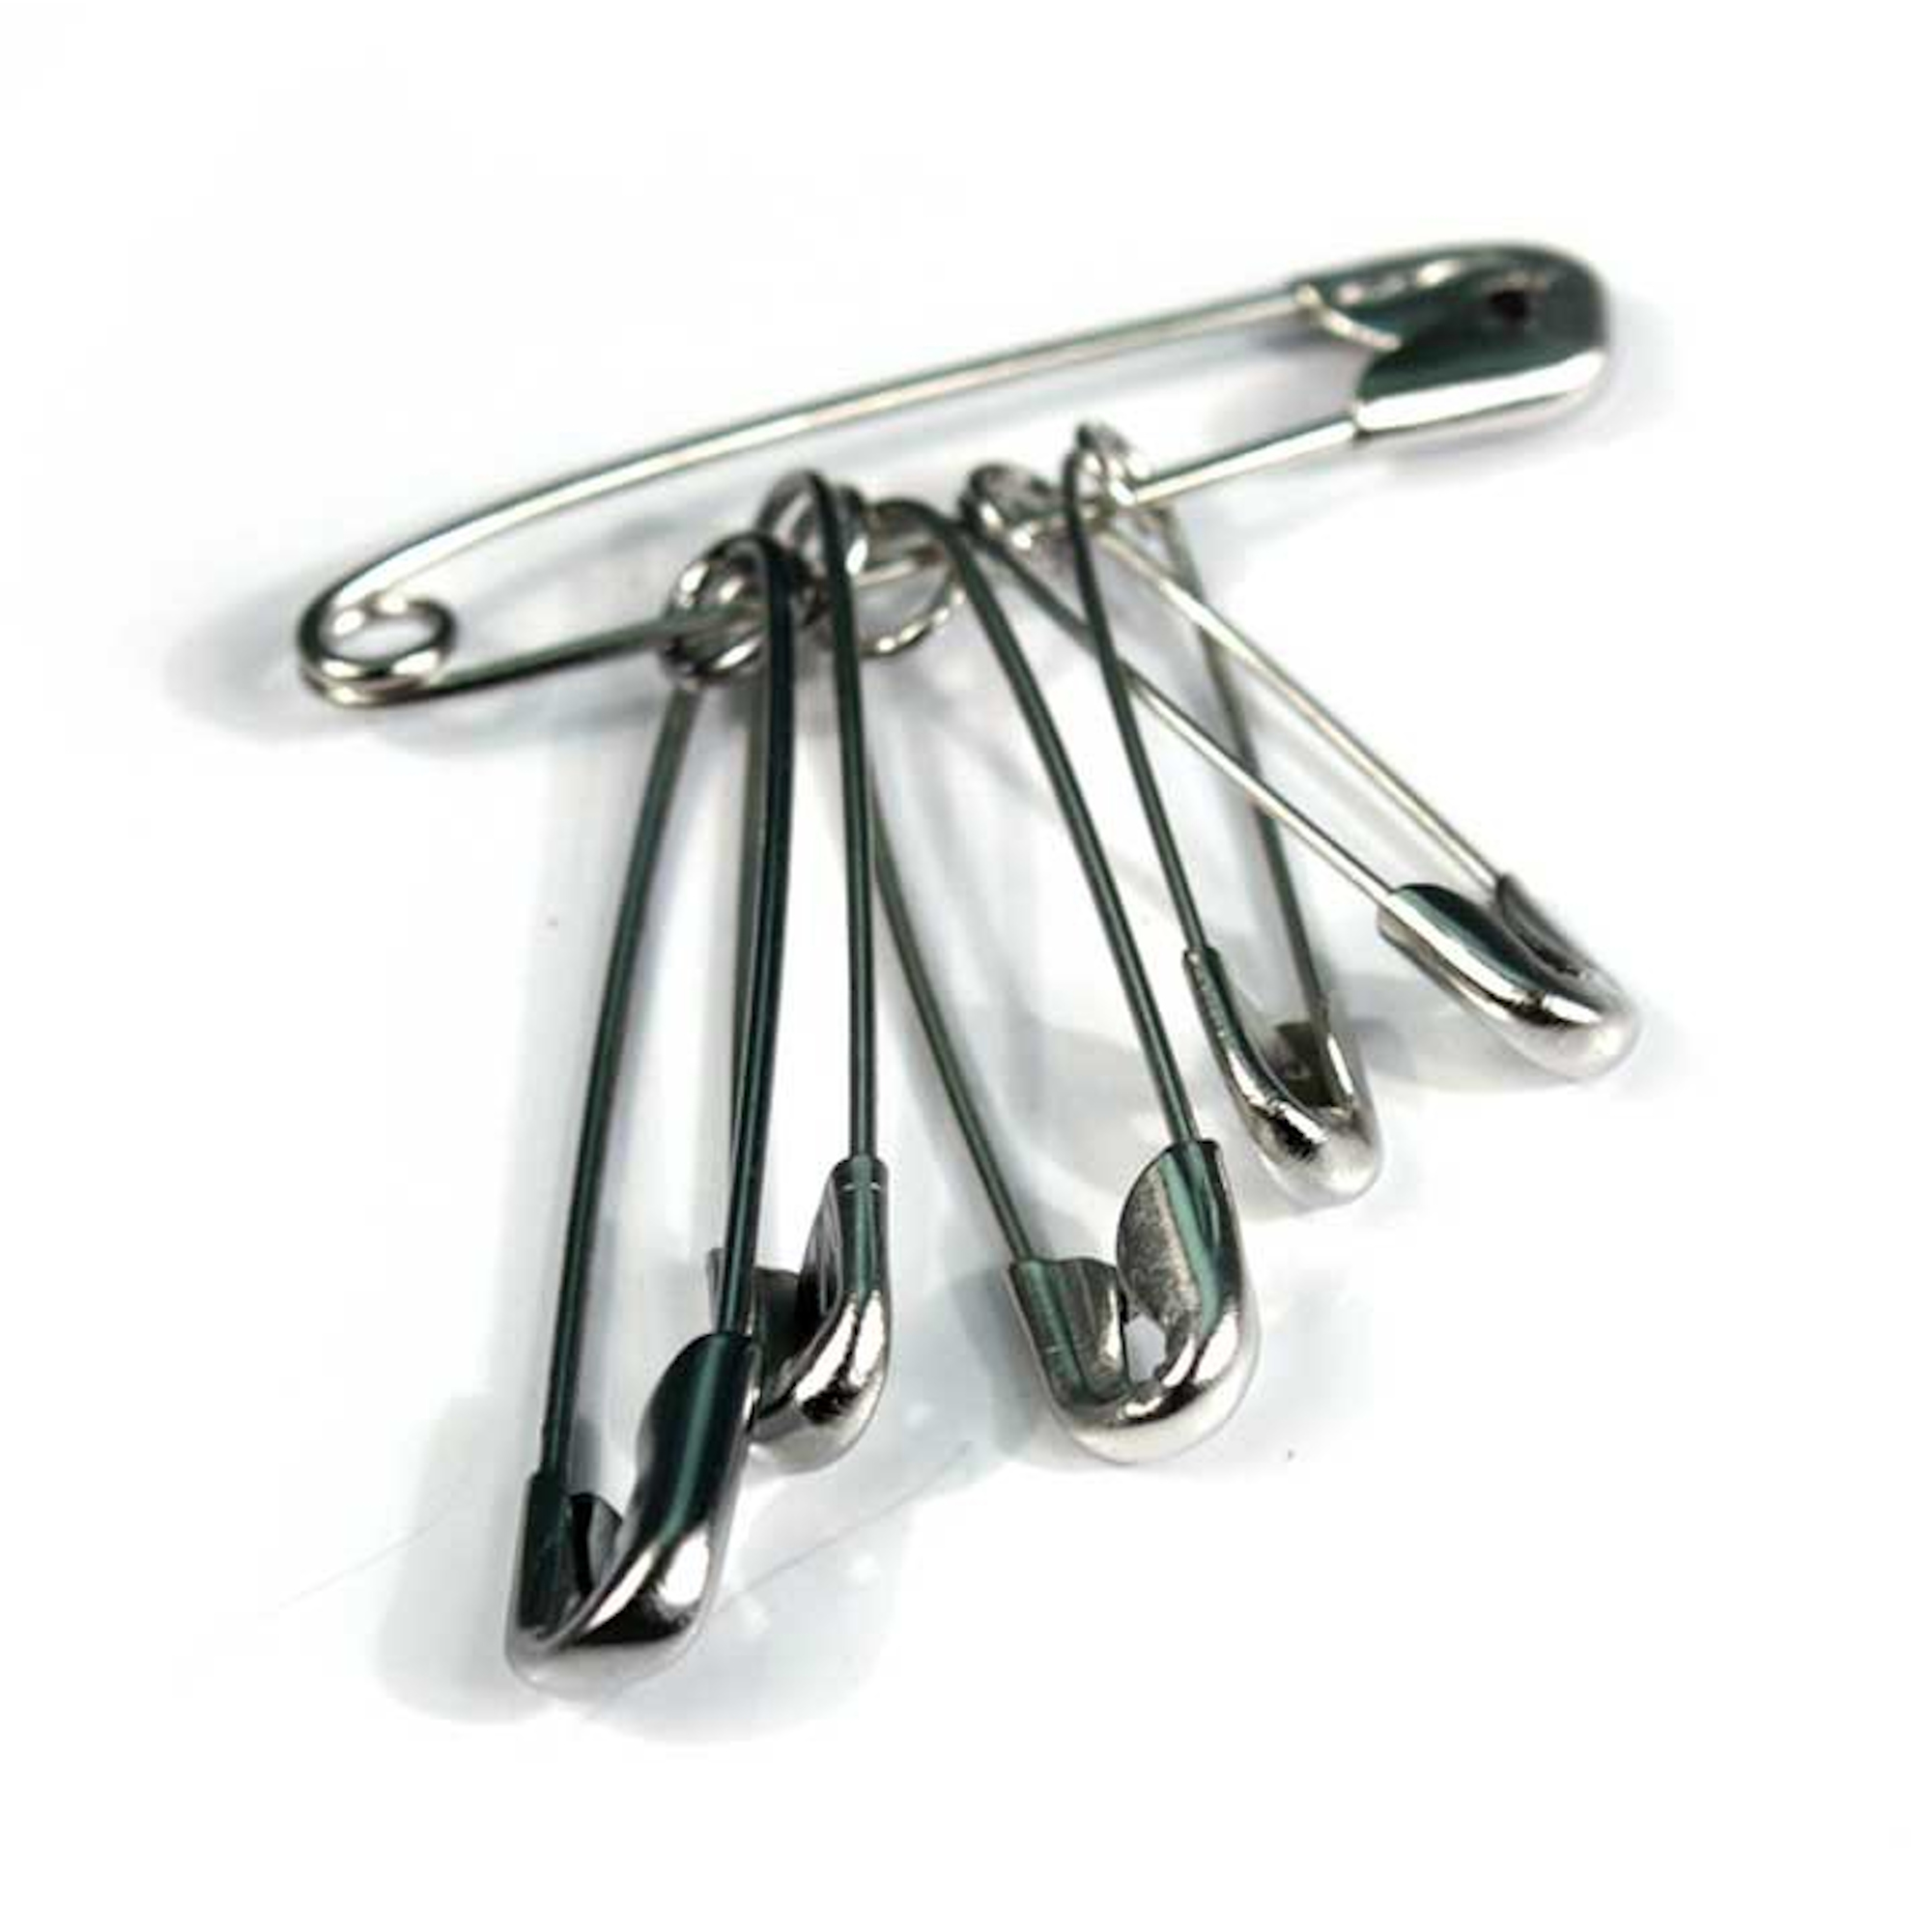 5152 Safety Pins - Pack of 6